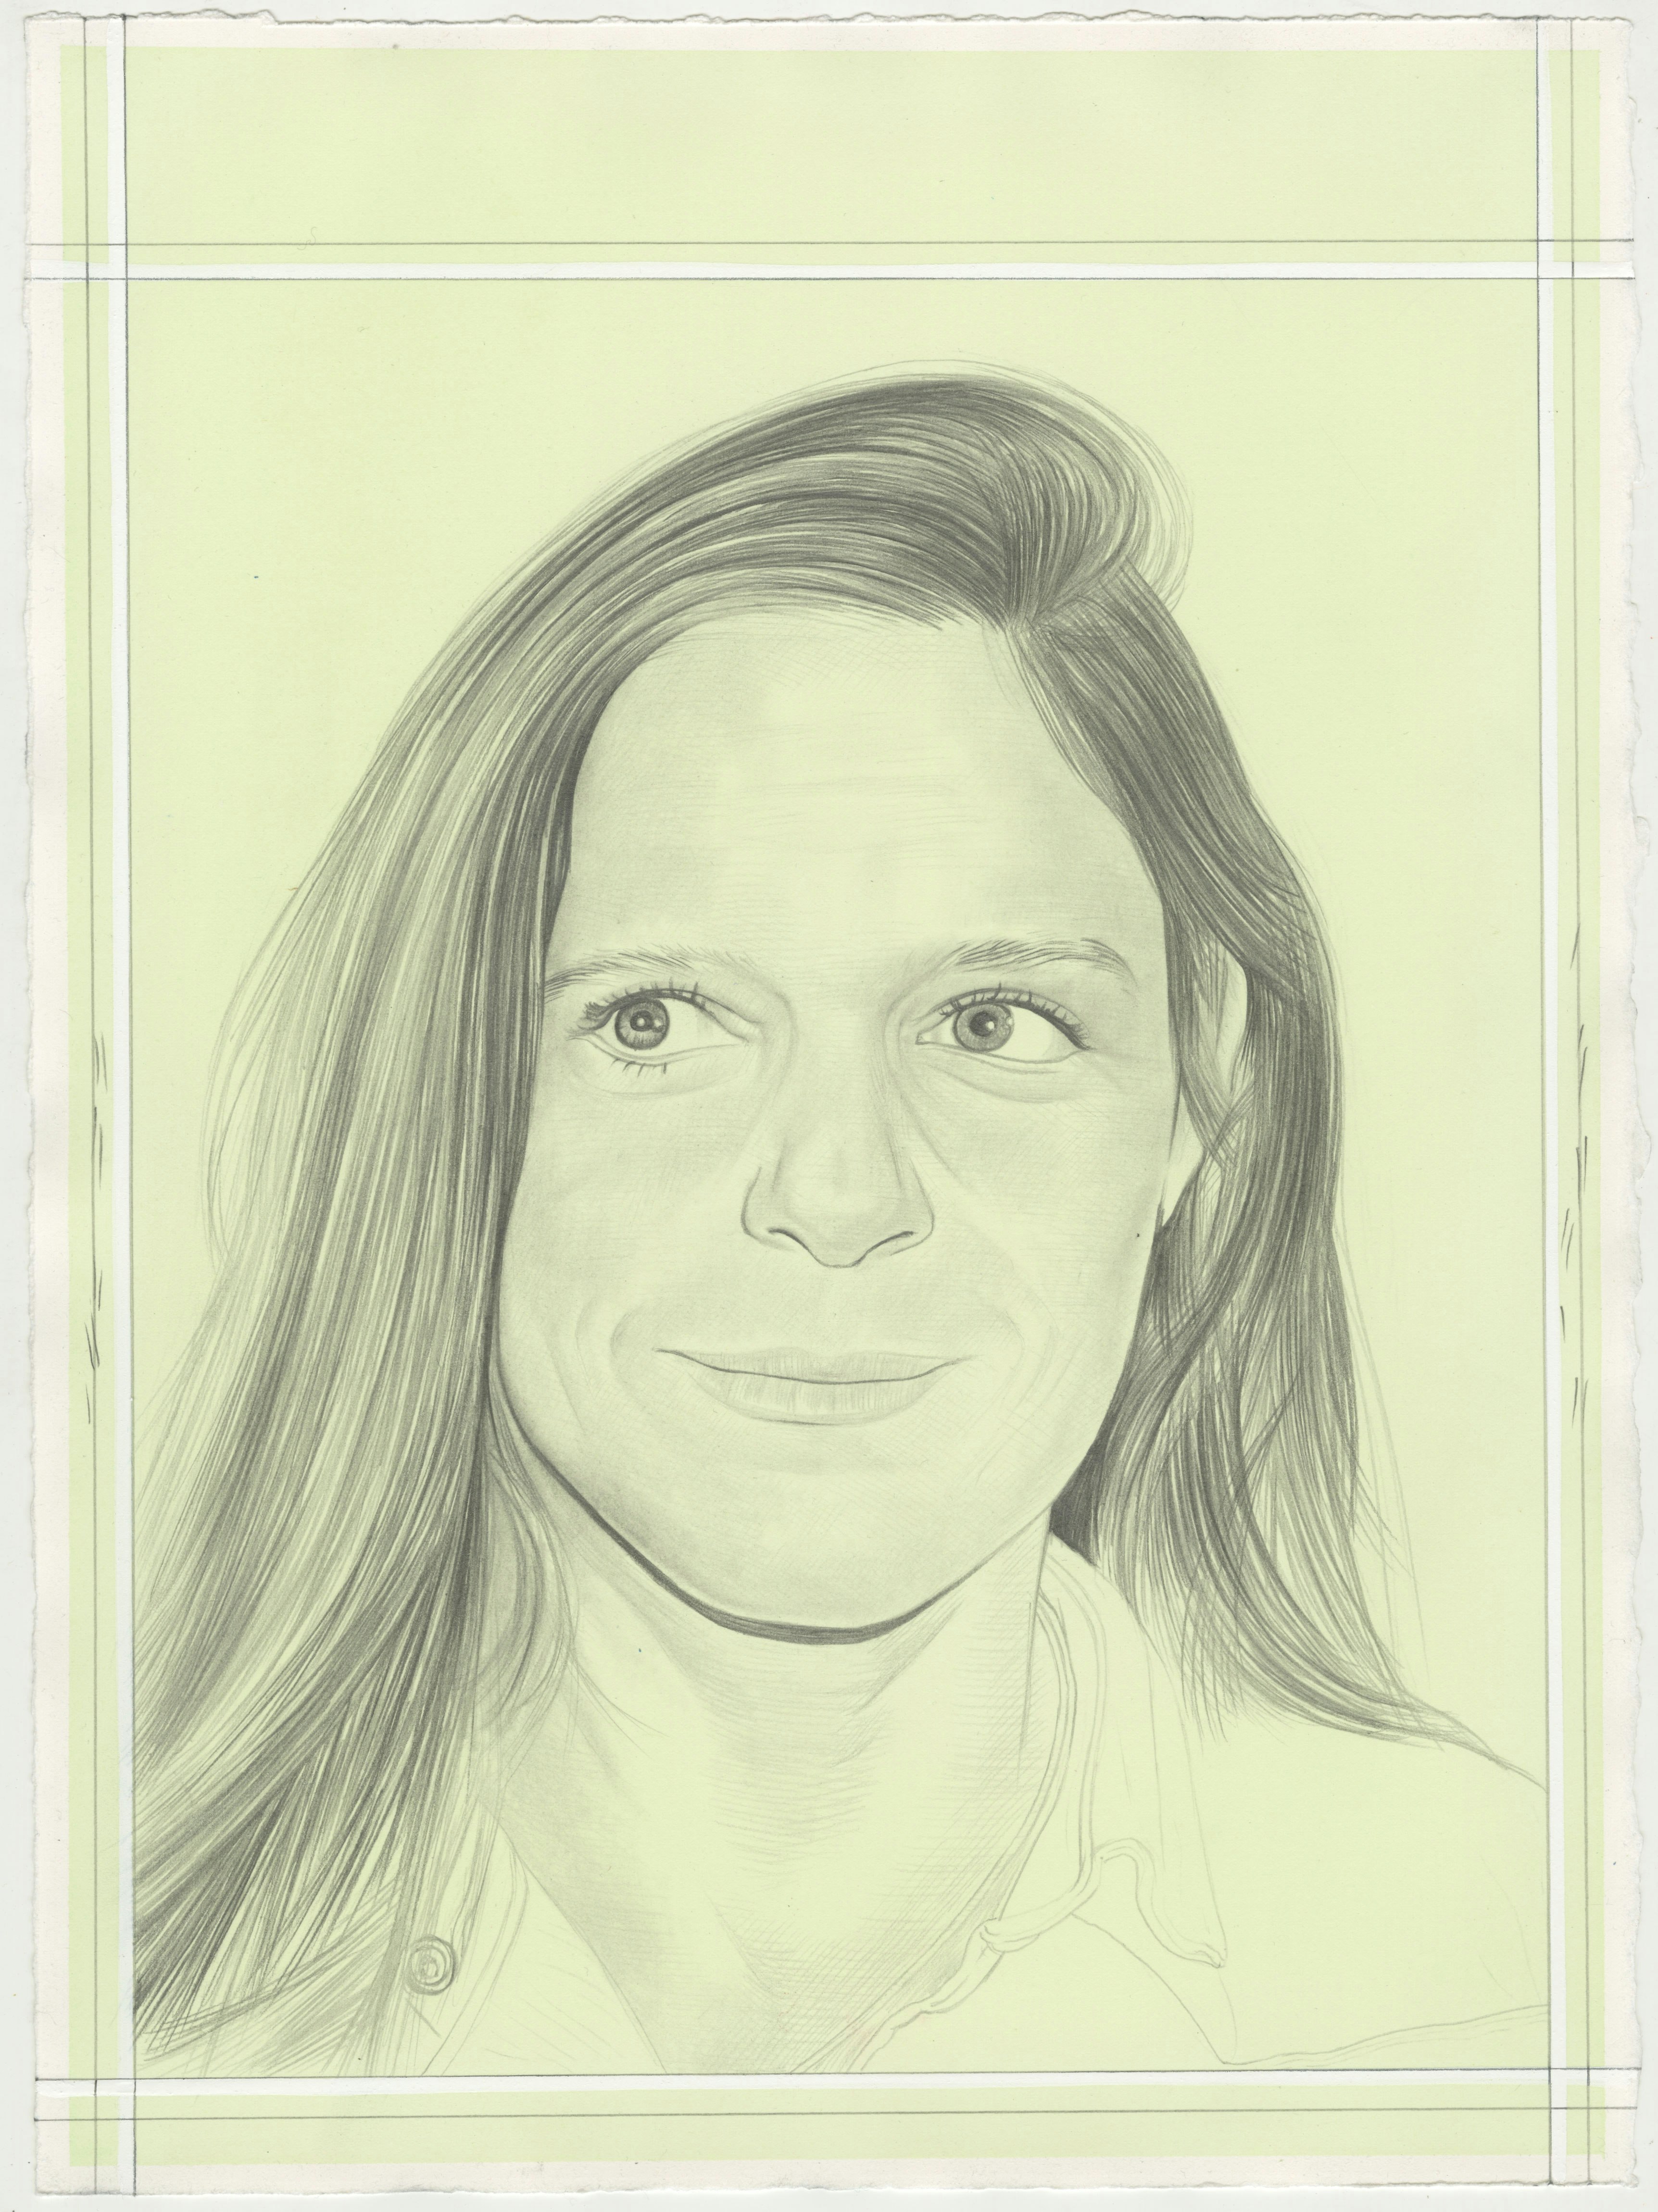 Portrait of Hilary Harnischfeger, pencil on paper by Phong H. Bui.